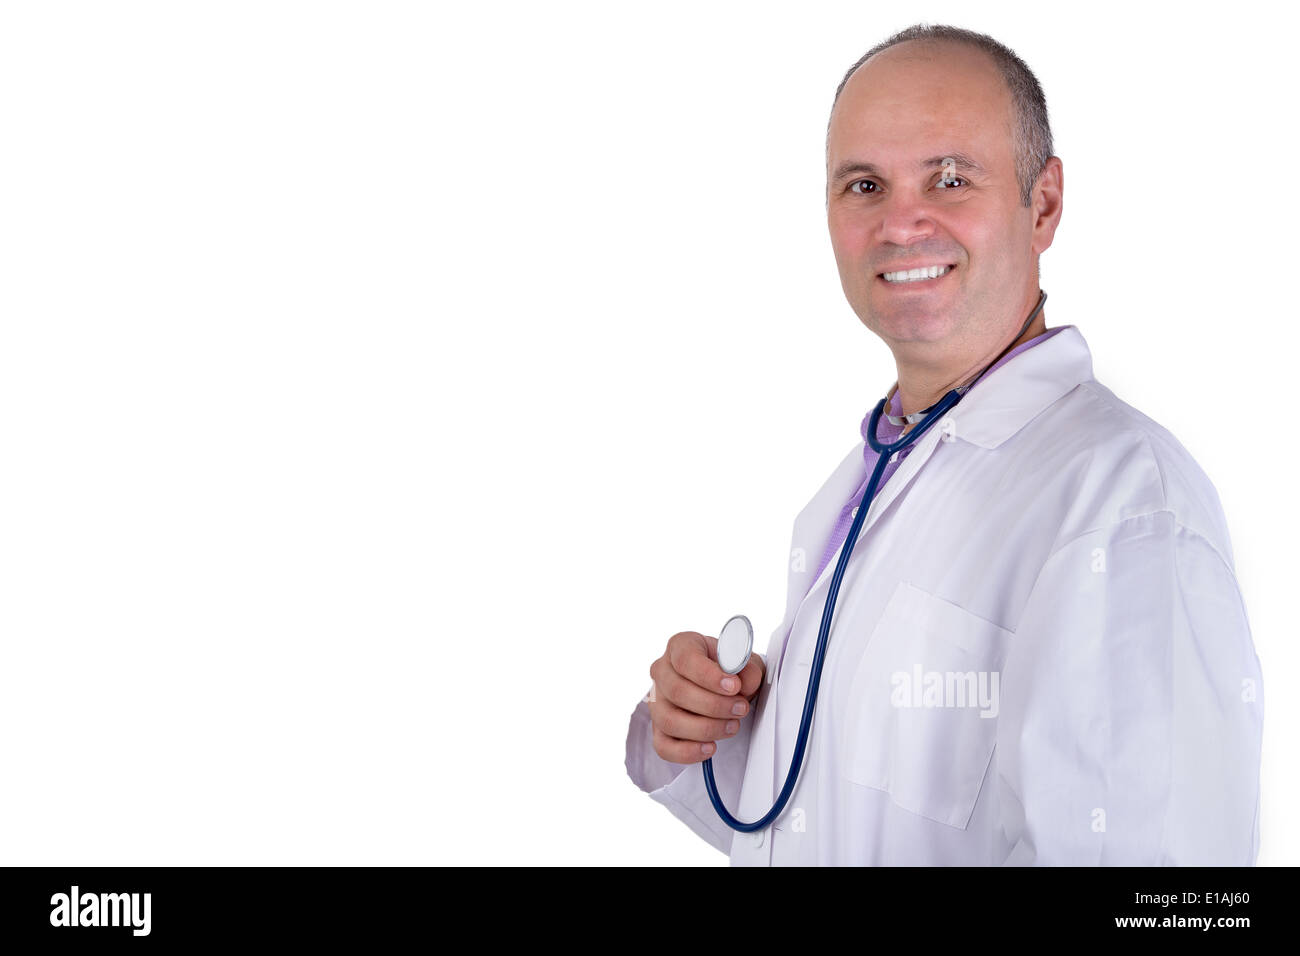 Middle age male practitioner doctor looking at you trustfully with a confident smile and holding his stethoscope Stock Photo